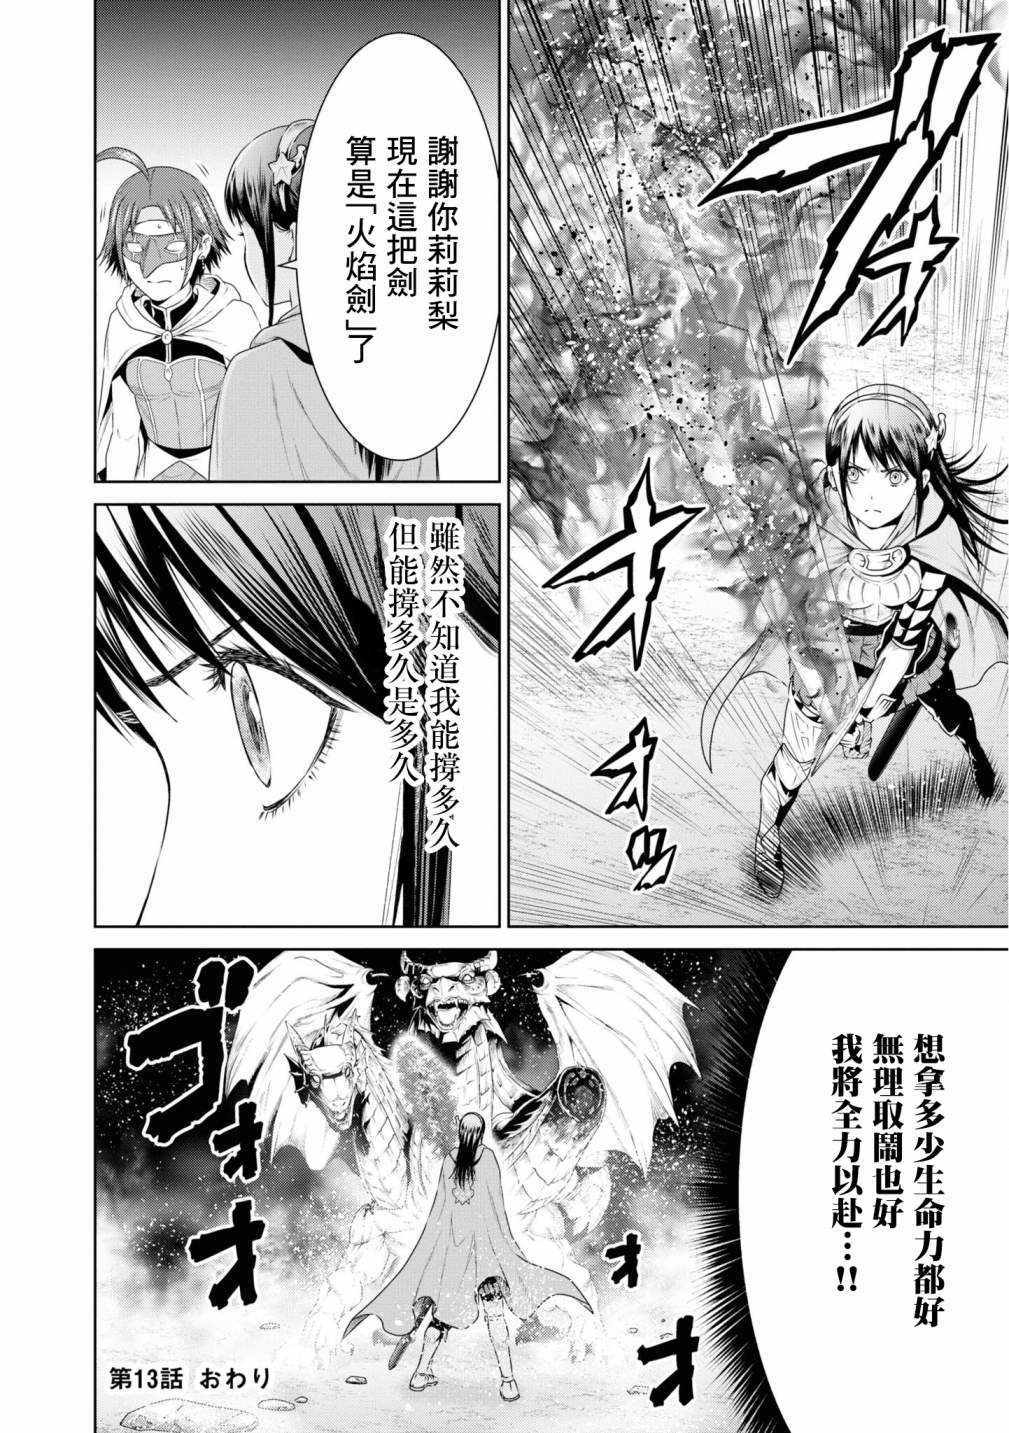 《THE KING OF FANTASY 八神庵的异世界无双》漫画 八神庵的异世界无双 013集